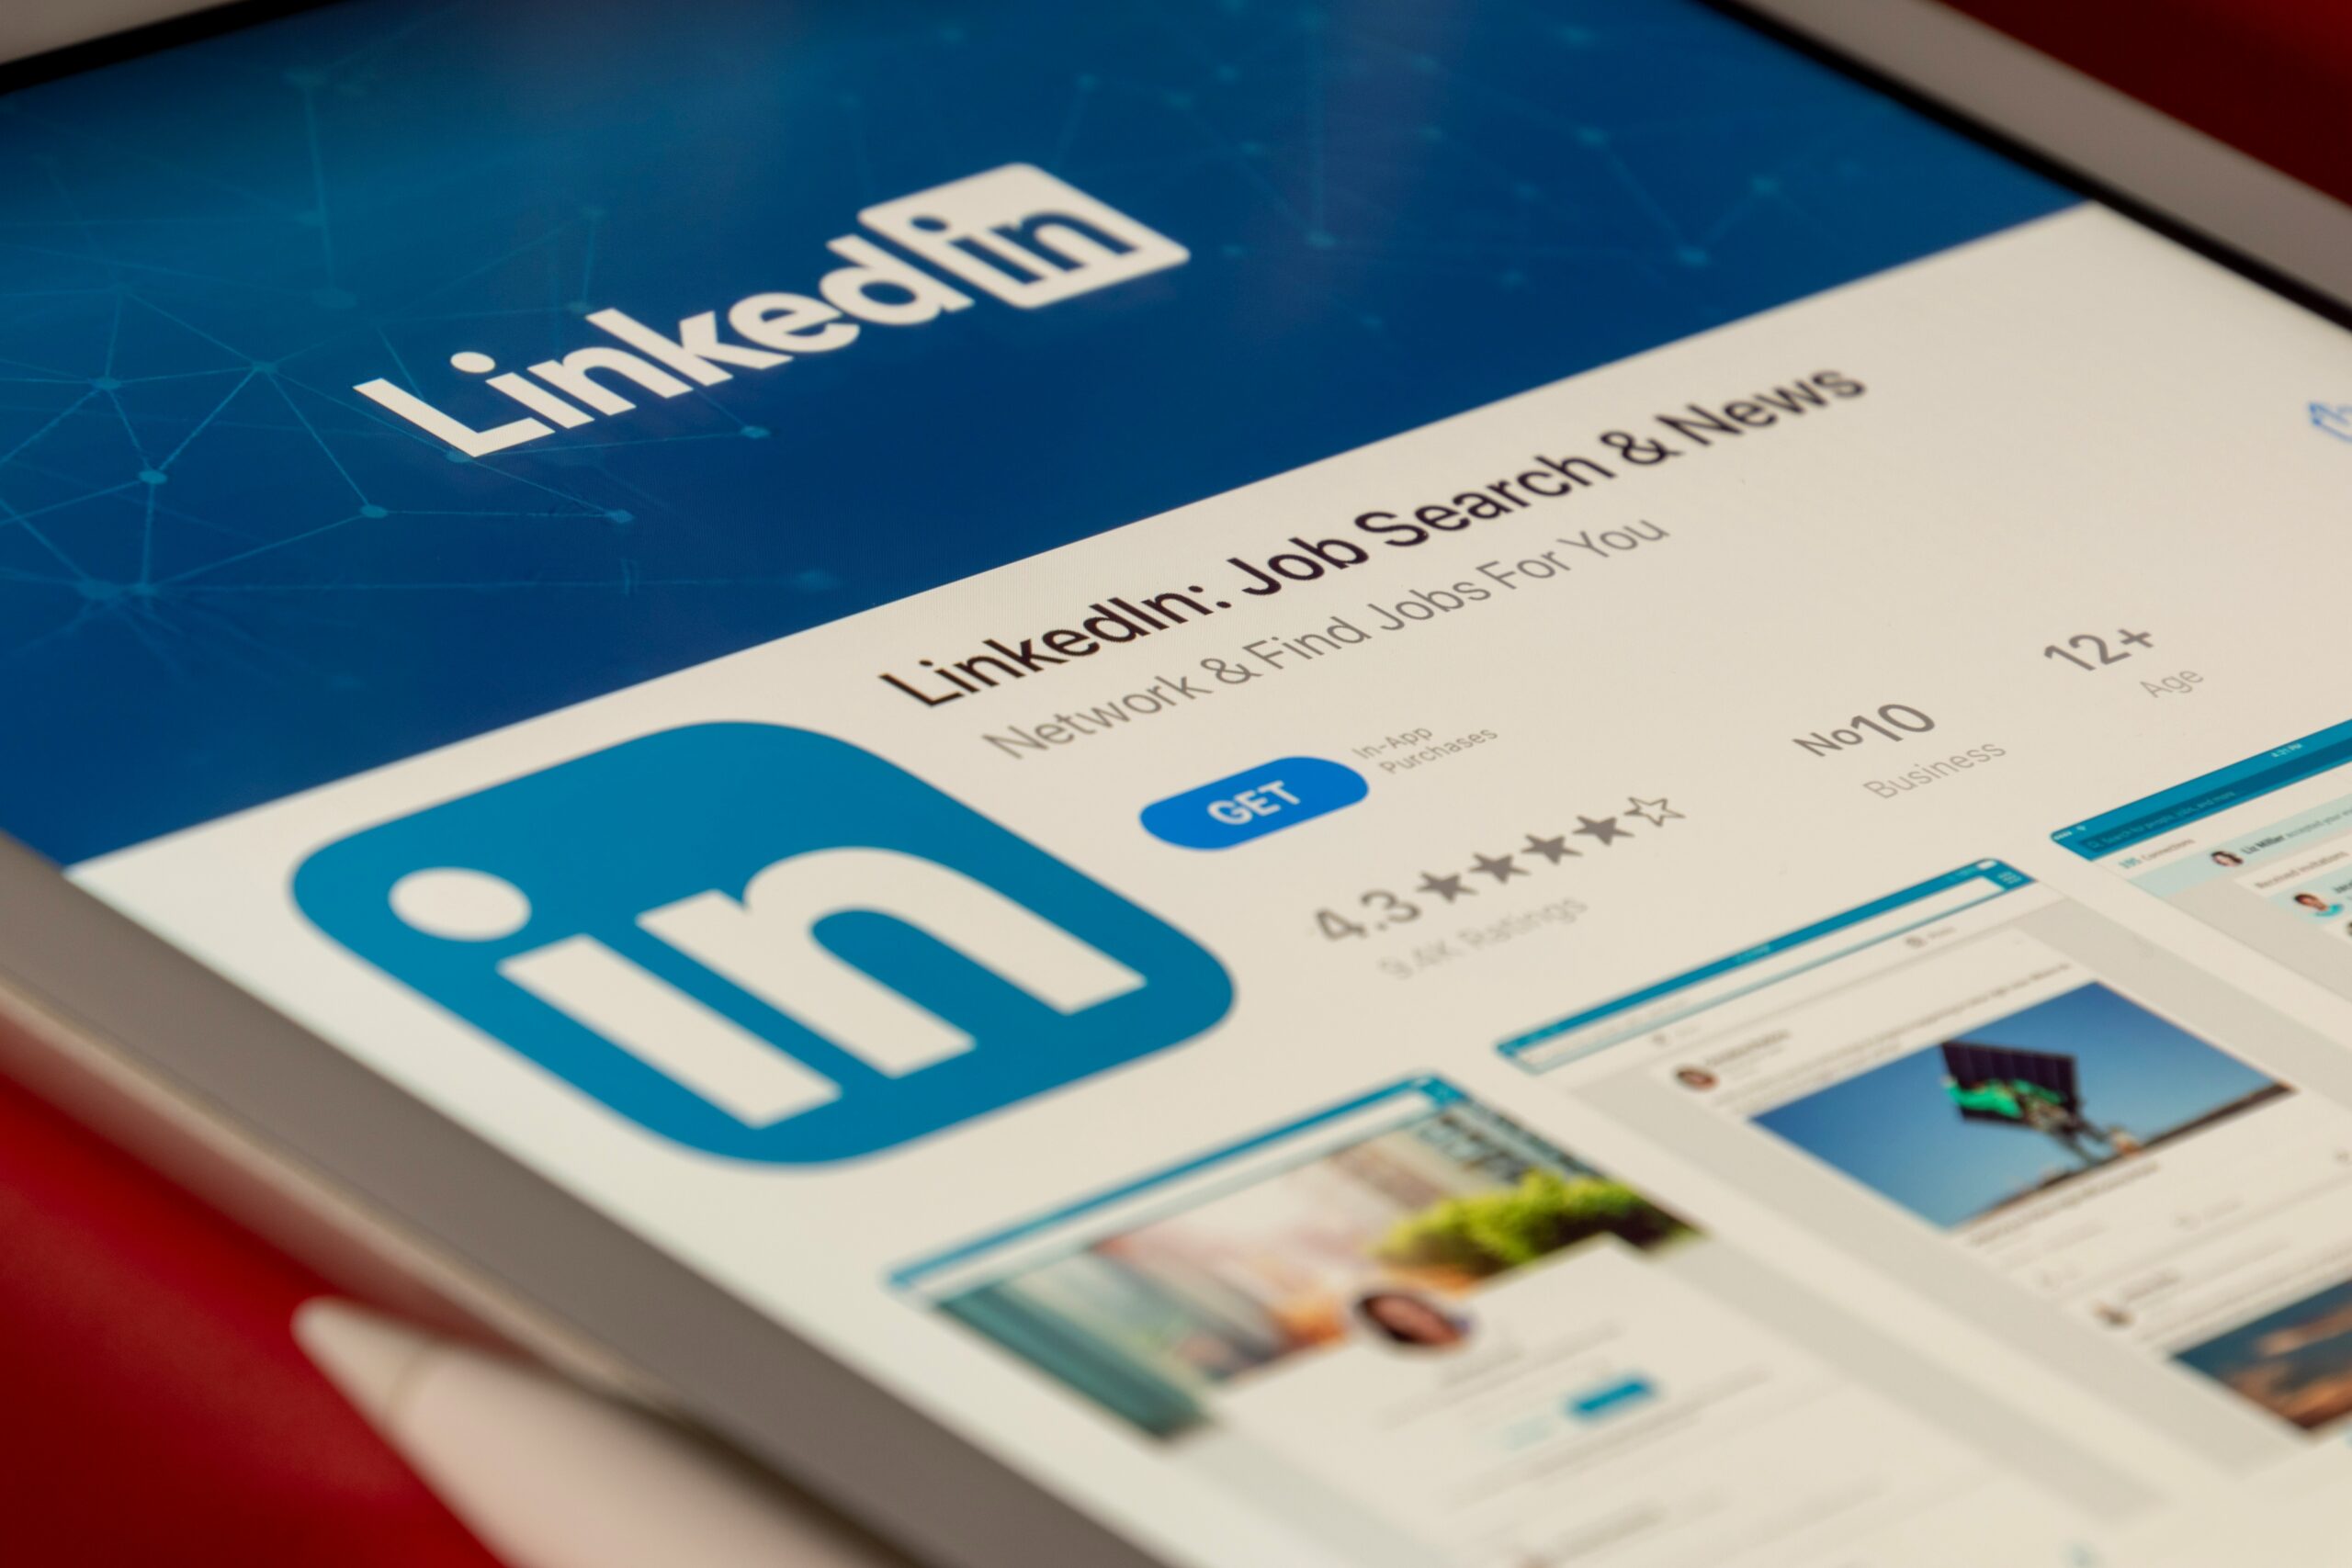 Hashtags on LinkedIn: Should You Sprinkle Them In or Leave Them Out?